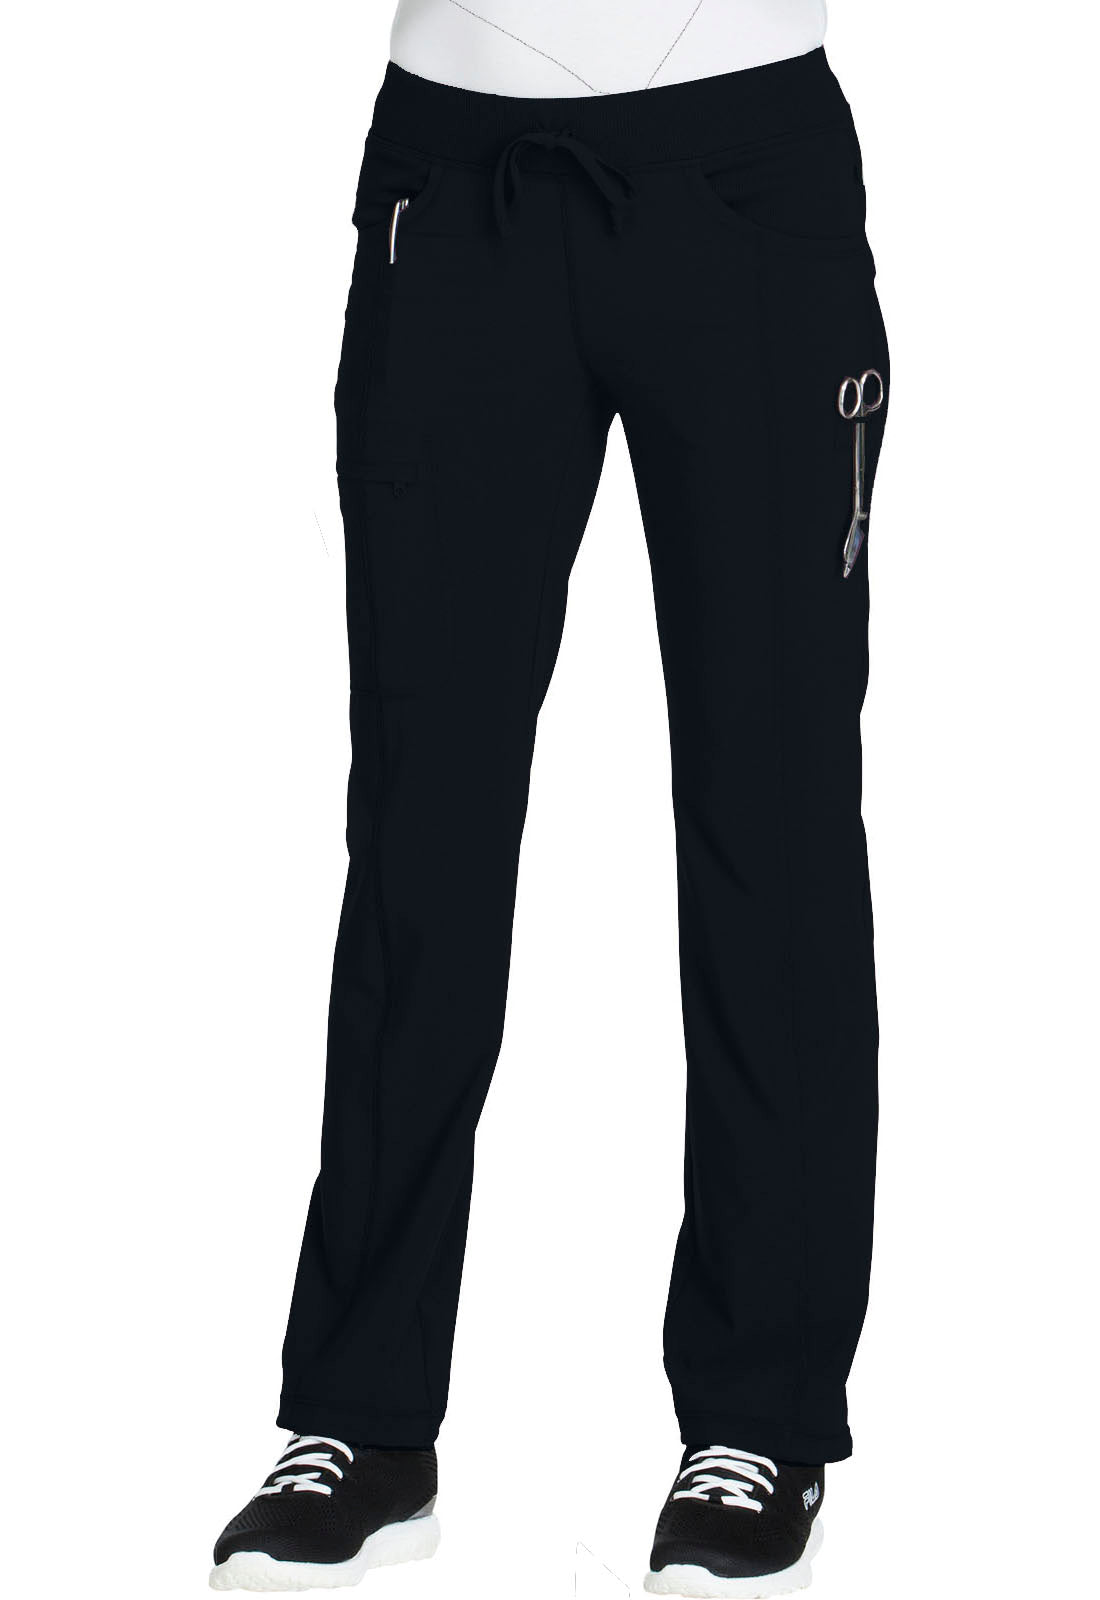 SVH - Ortho and Sports - 1123A Ladies Low Rise Straight Leg Drawstring Pant